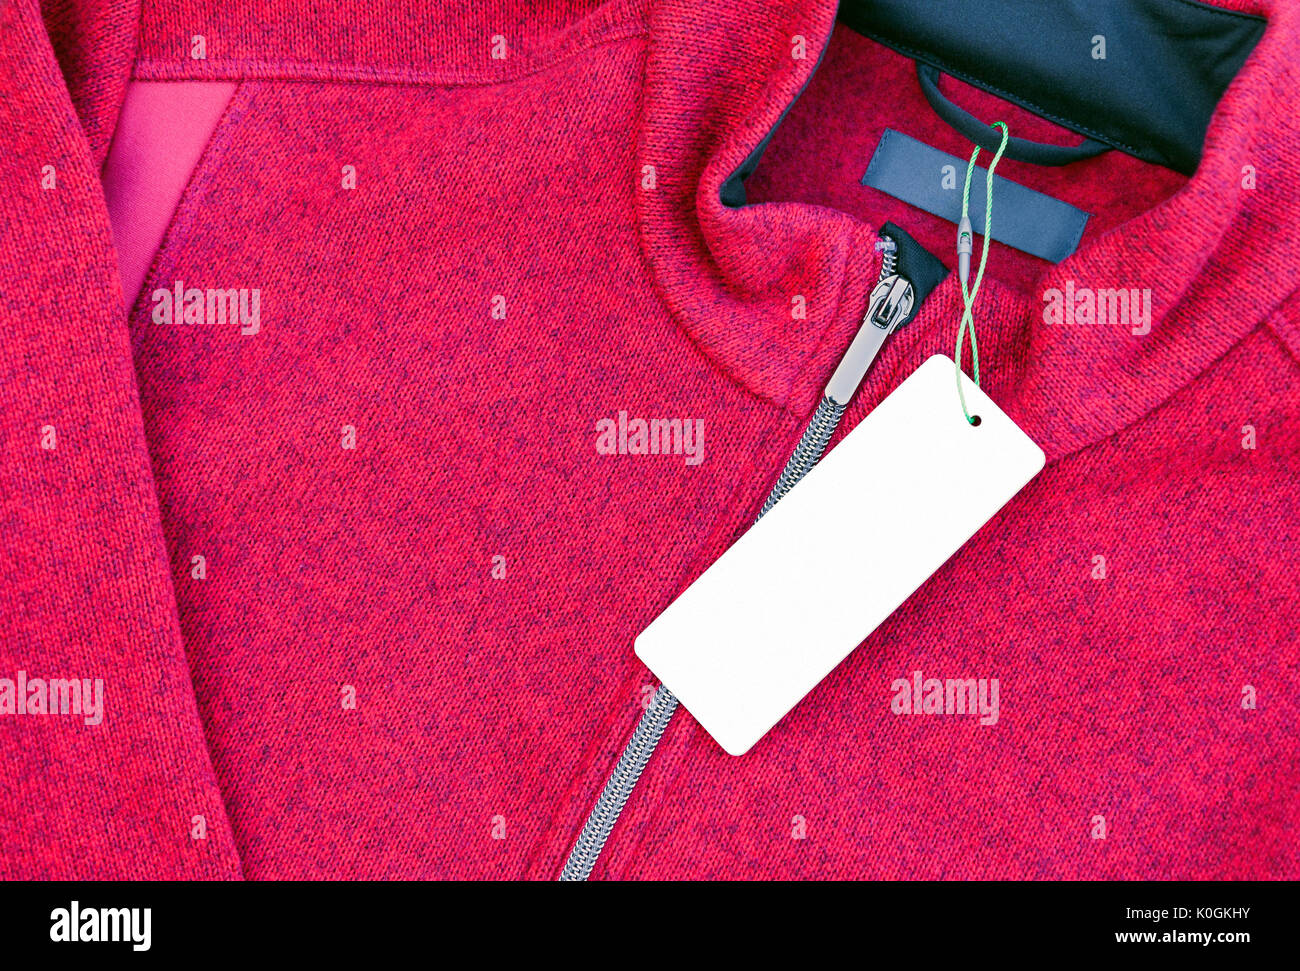 White blank clothing label tag on a new red jacket with zipper Stock Photo